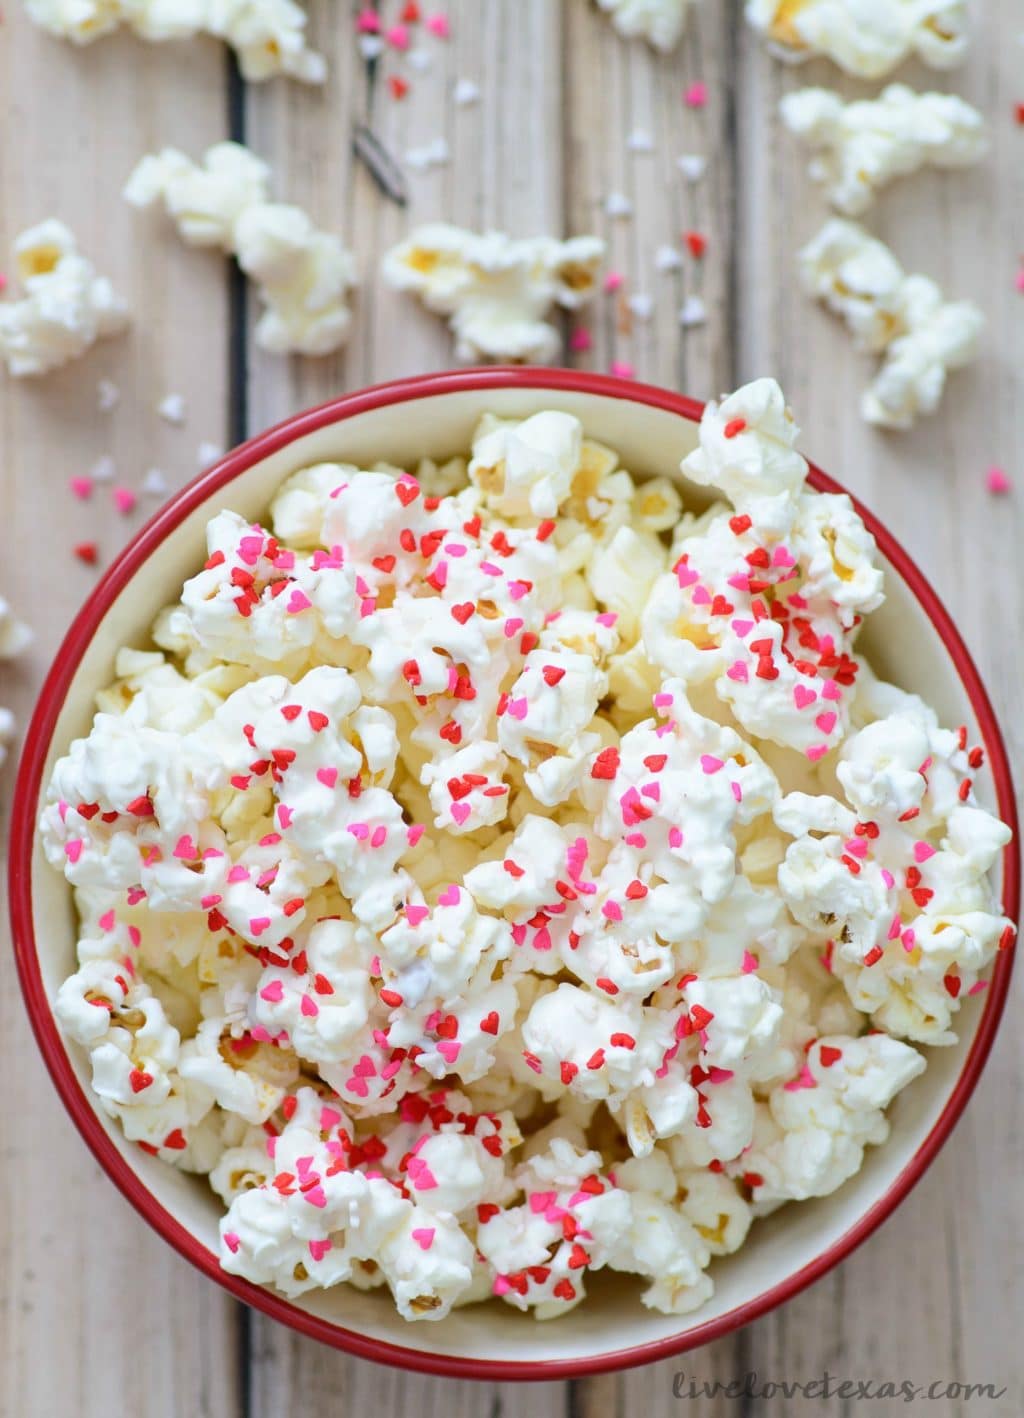 This dessert is the perfect combination of crunchy and sweet. Plus, this Valentine Popcorn recipe is so cute and easy which makes it a no-brainer for any Valentine's Day entertaining!